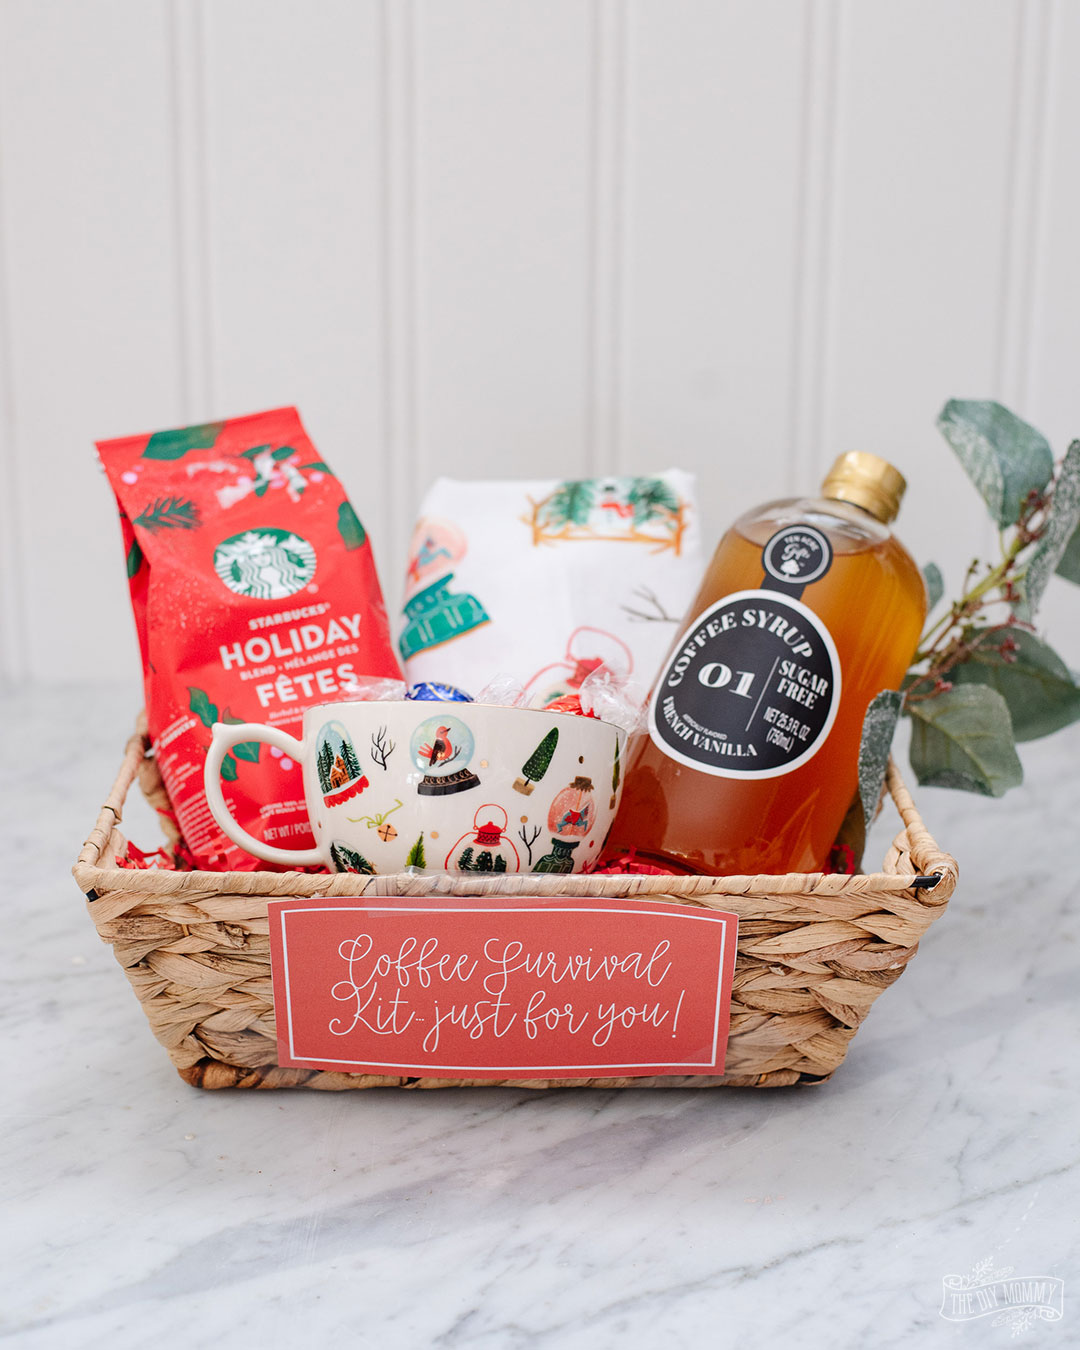 Easy Gift Basket Ideas for the Holidays - Maison de Pax